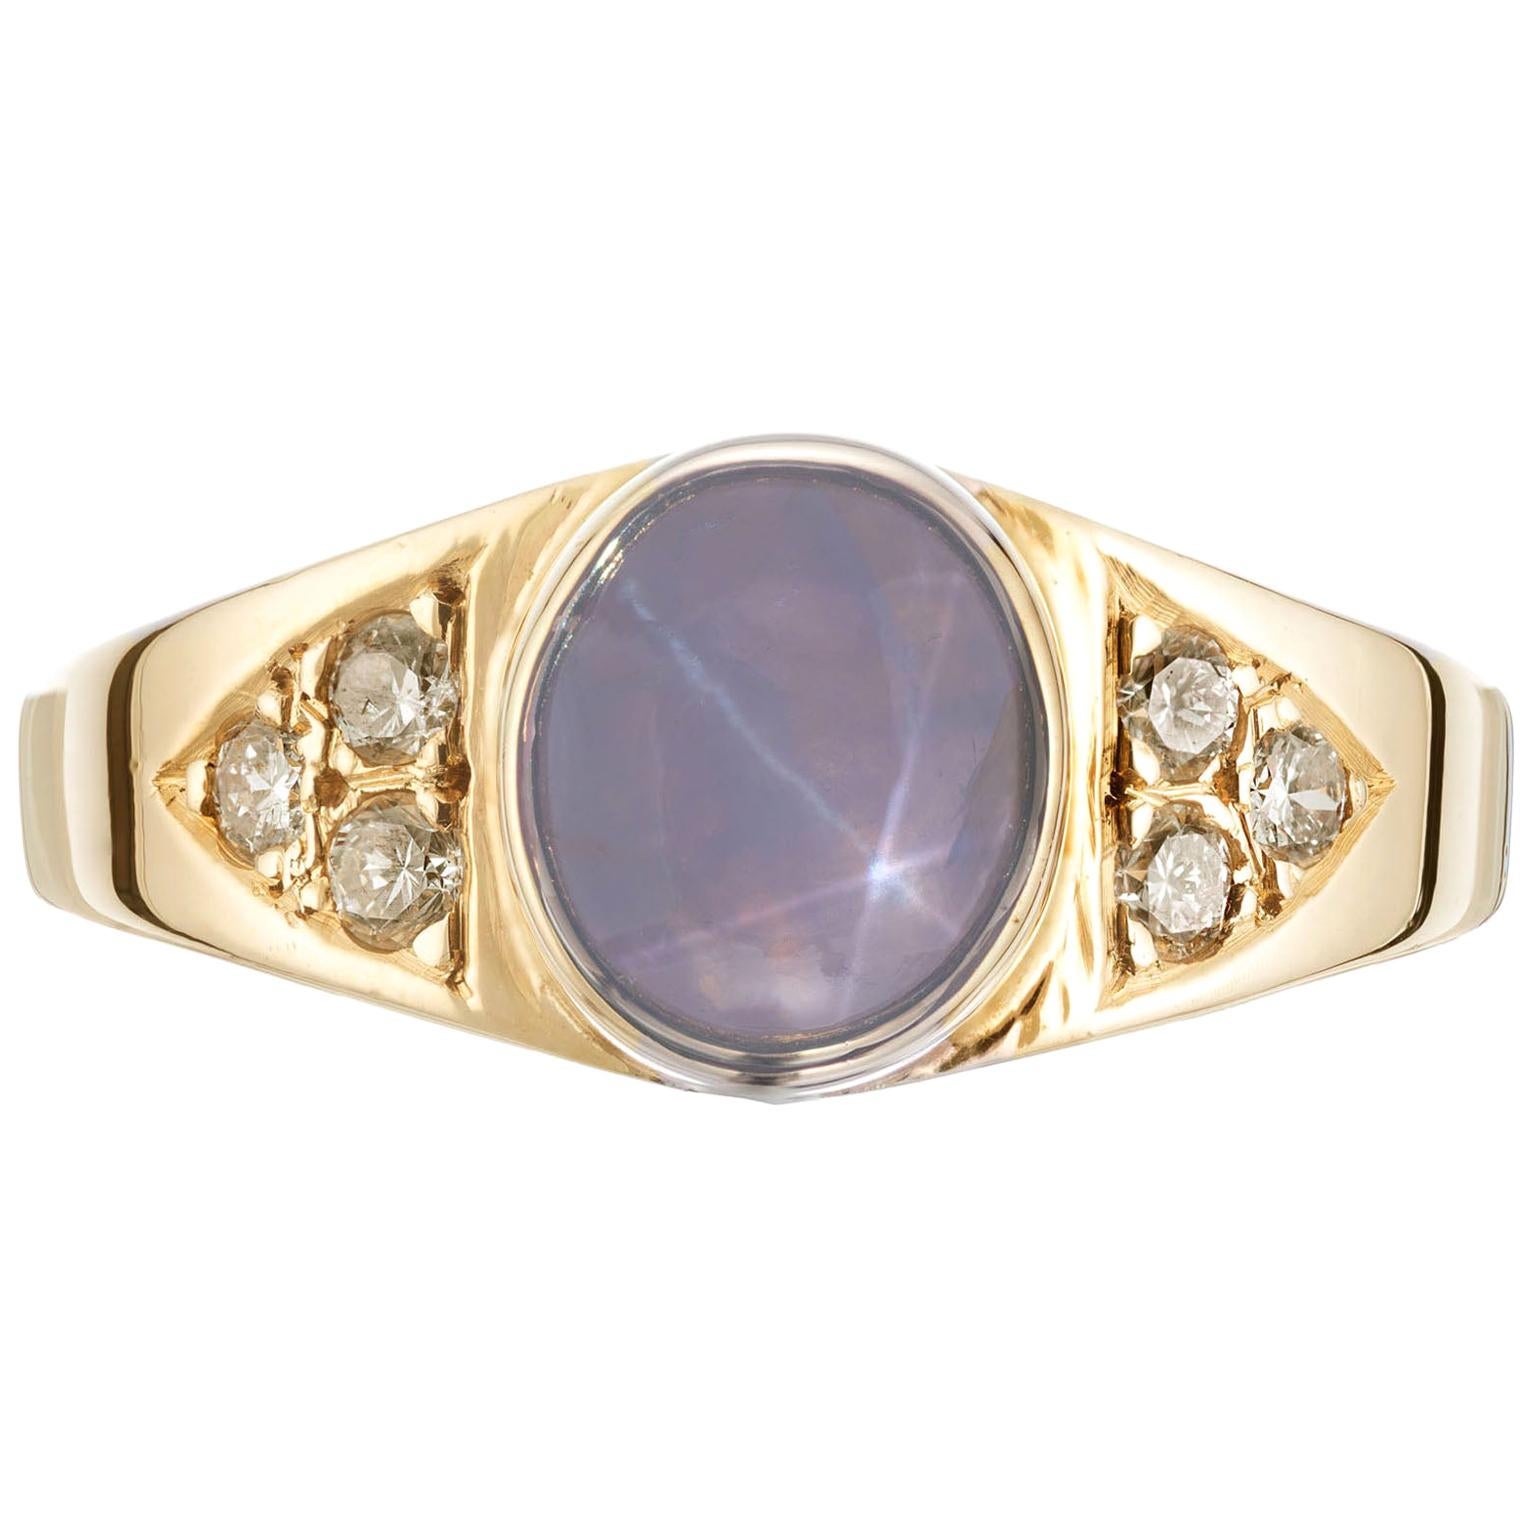 GIA Certified 2.38 Carat Cabochon Star Sapphire Diamond Yellow Gold Ring